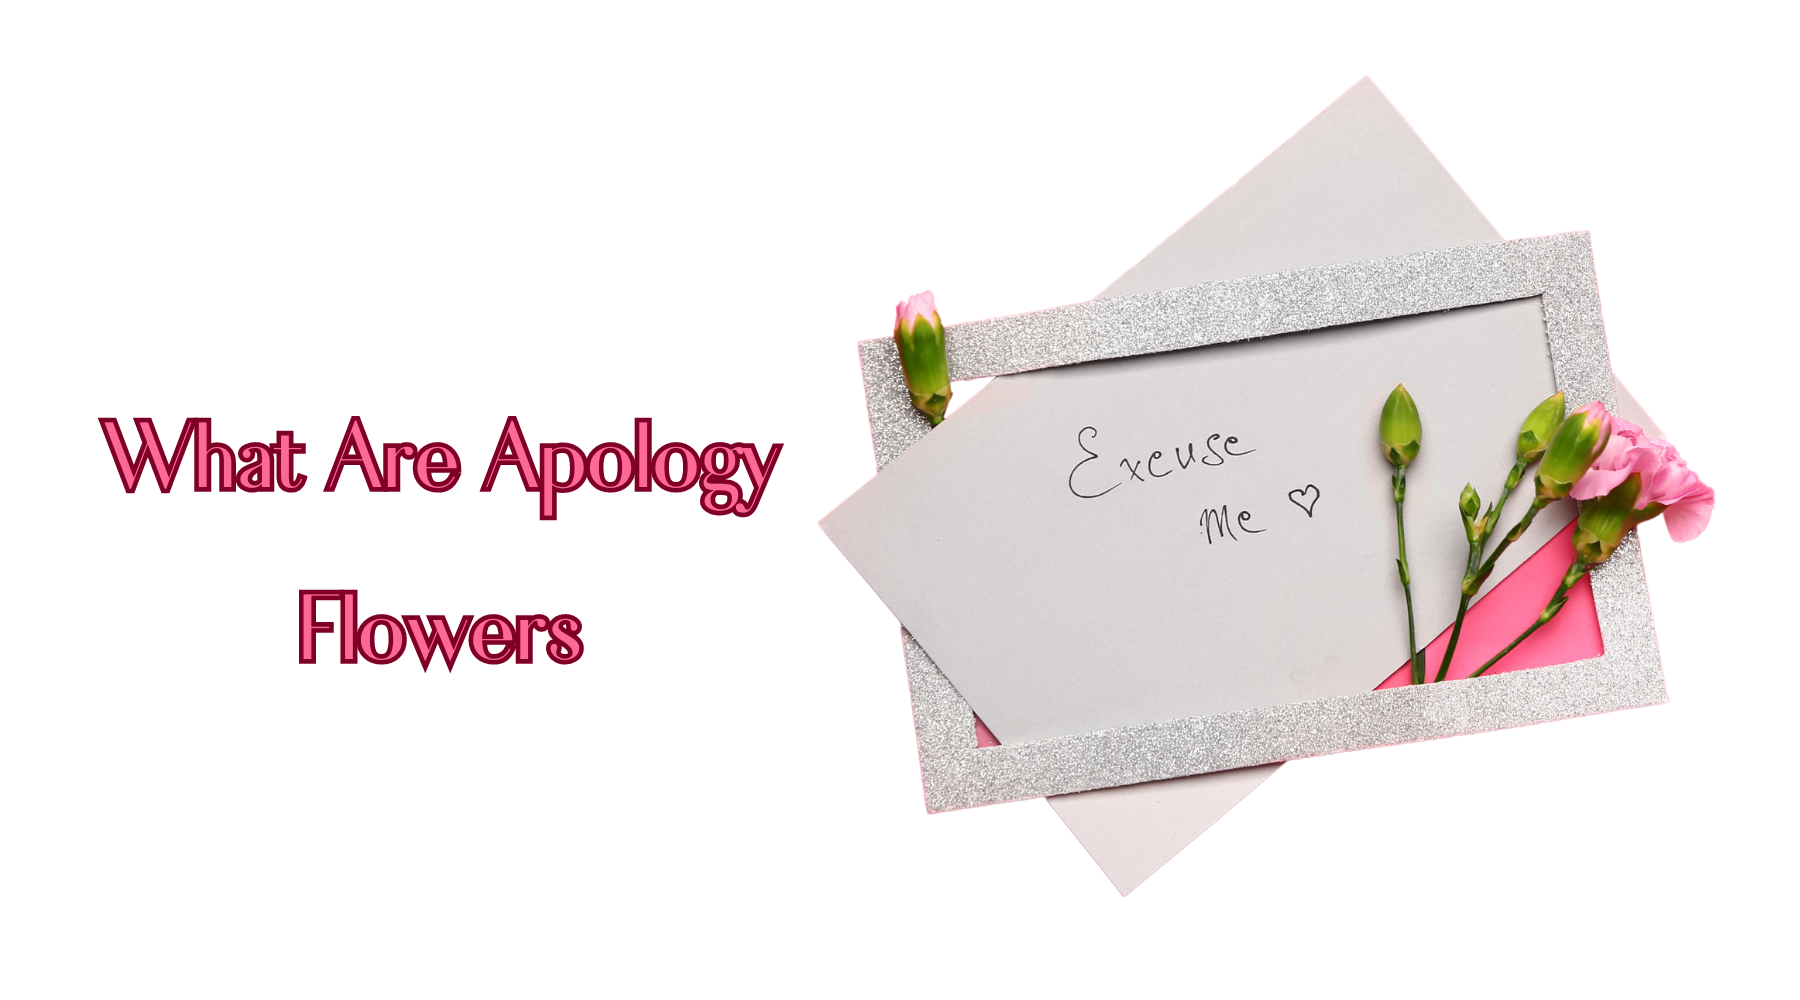 What Are Apology Flowers